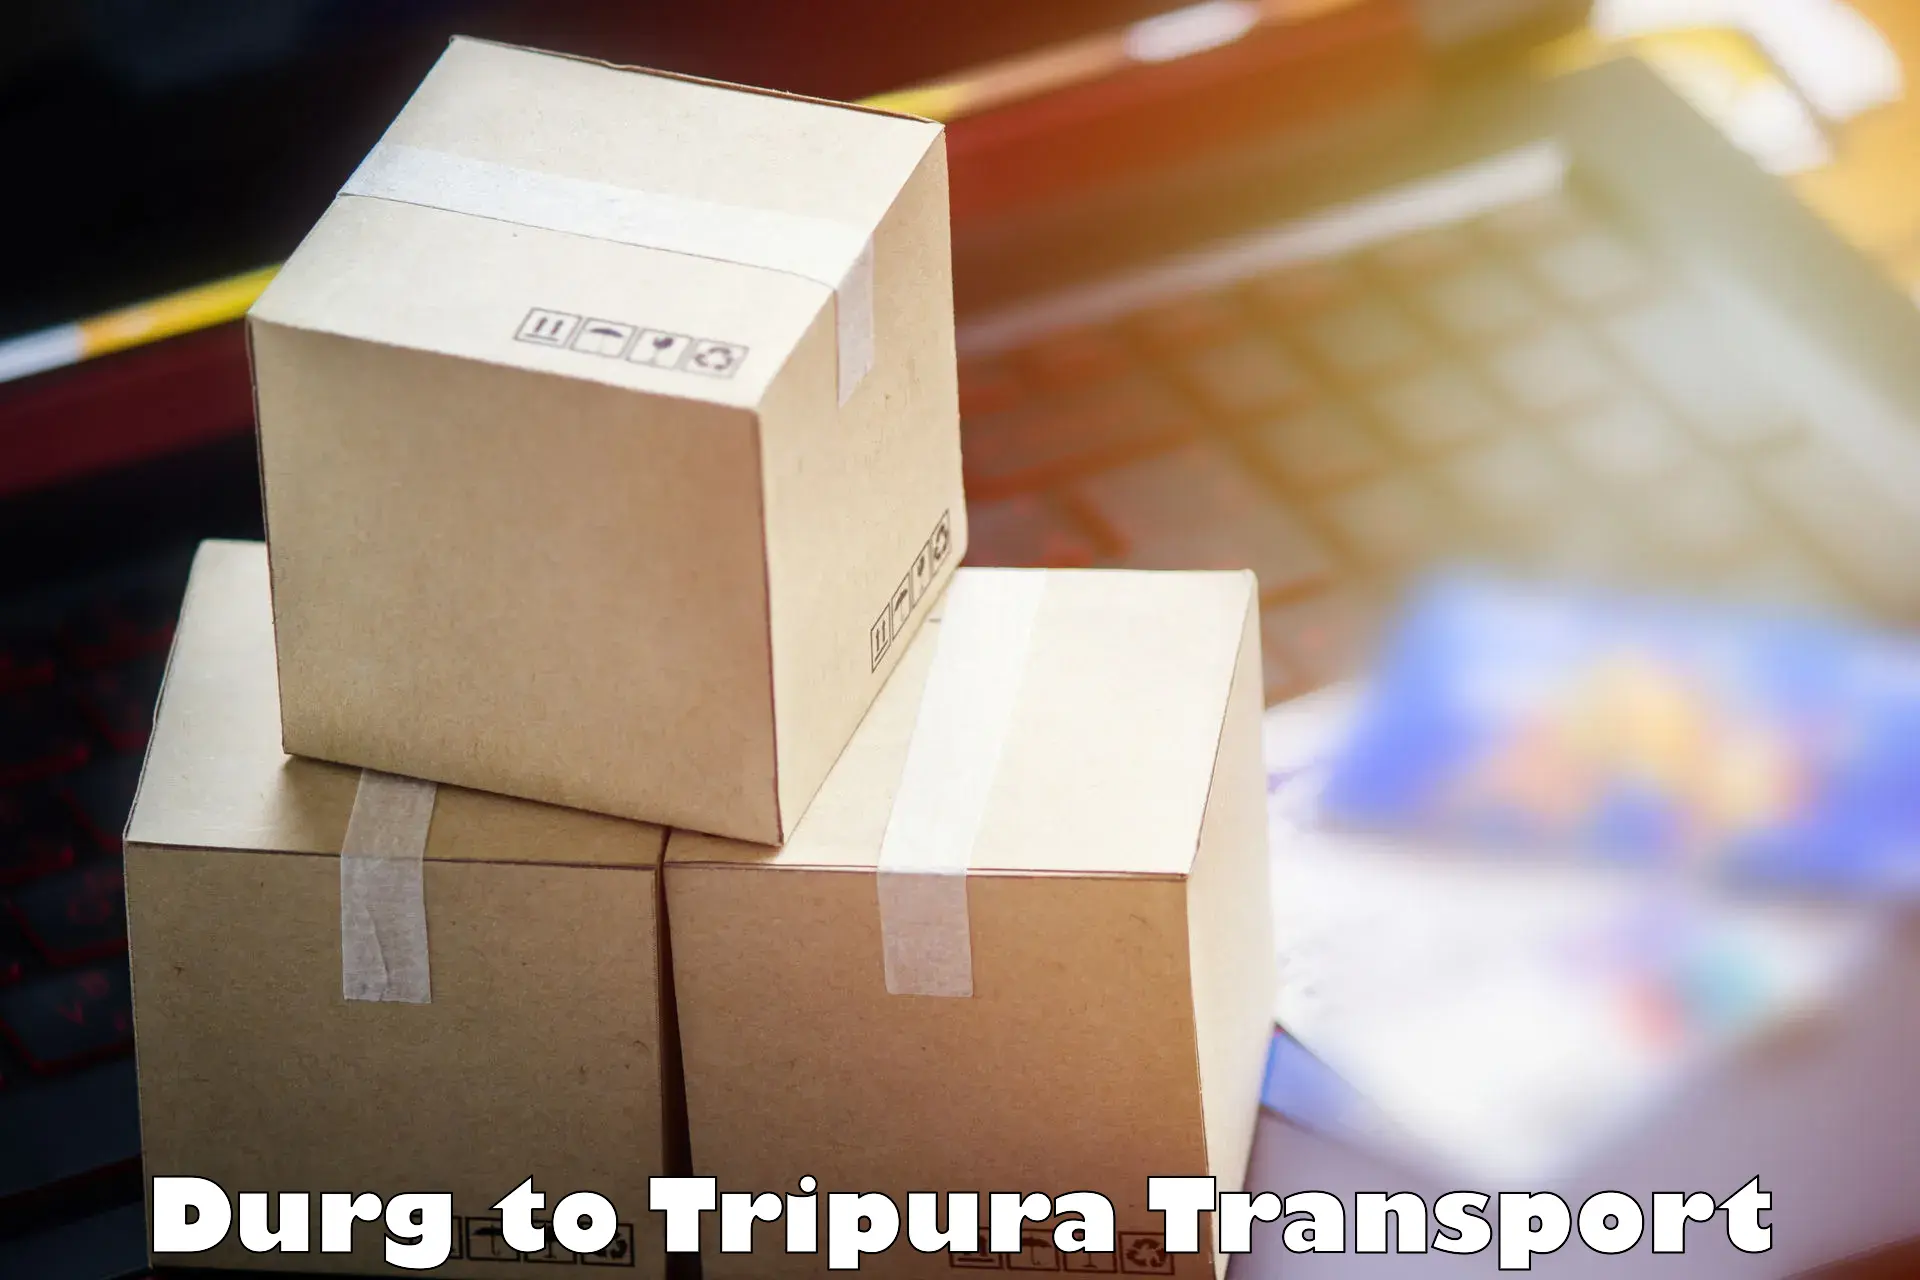 Delivery service Durg to Udaipur Tripura